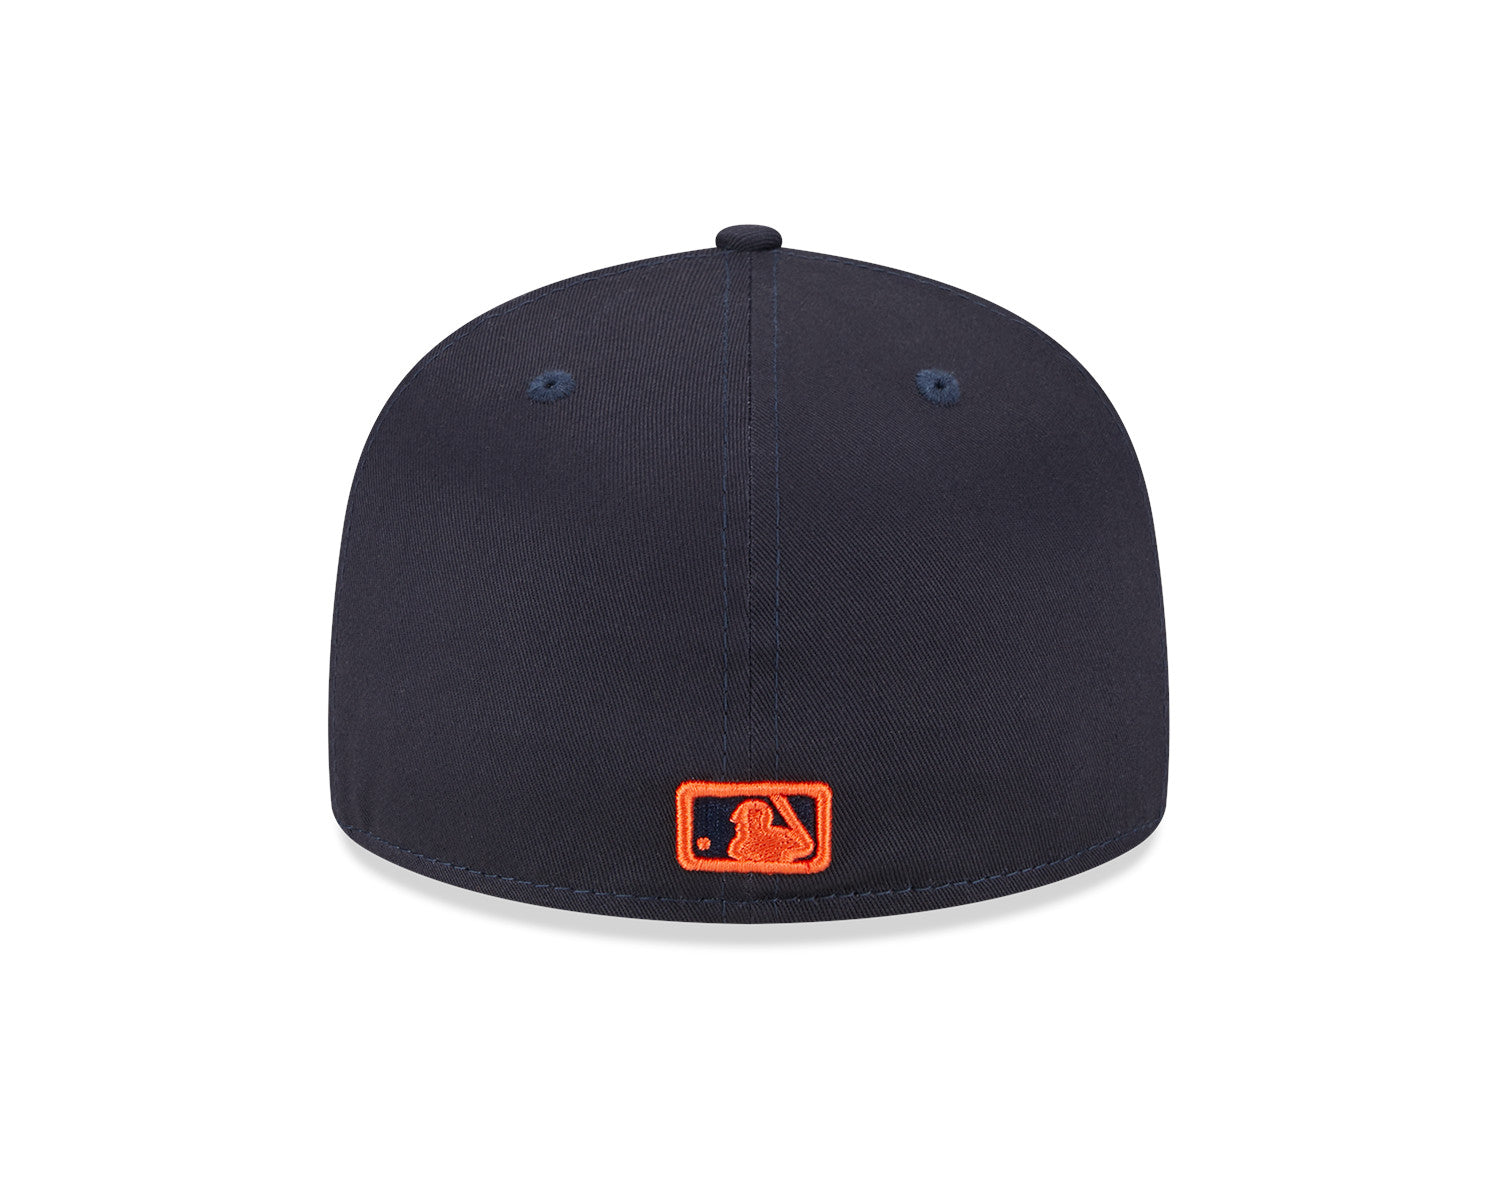 NEW ERA 59FIFTY MLB LEAGUE ESSENTIAL DETROIT TIGERS TEAM NAVY FITTED CAP